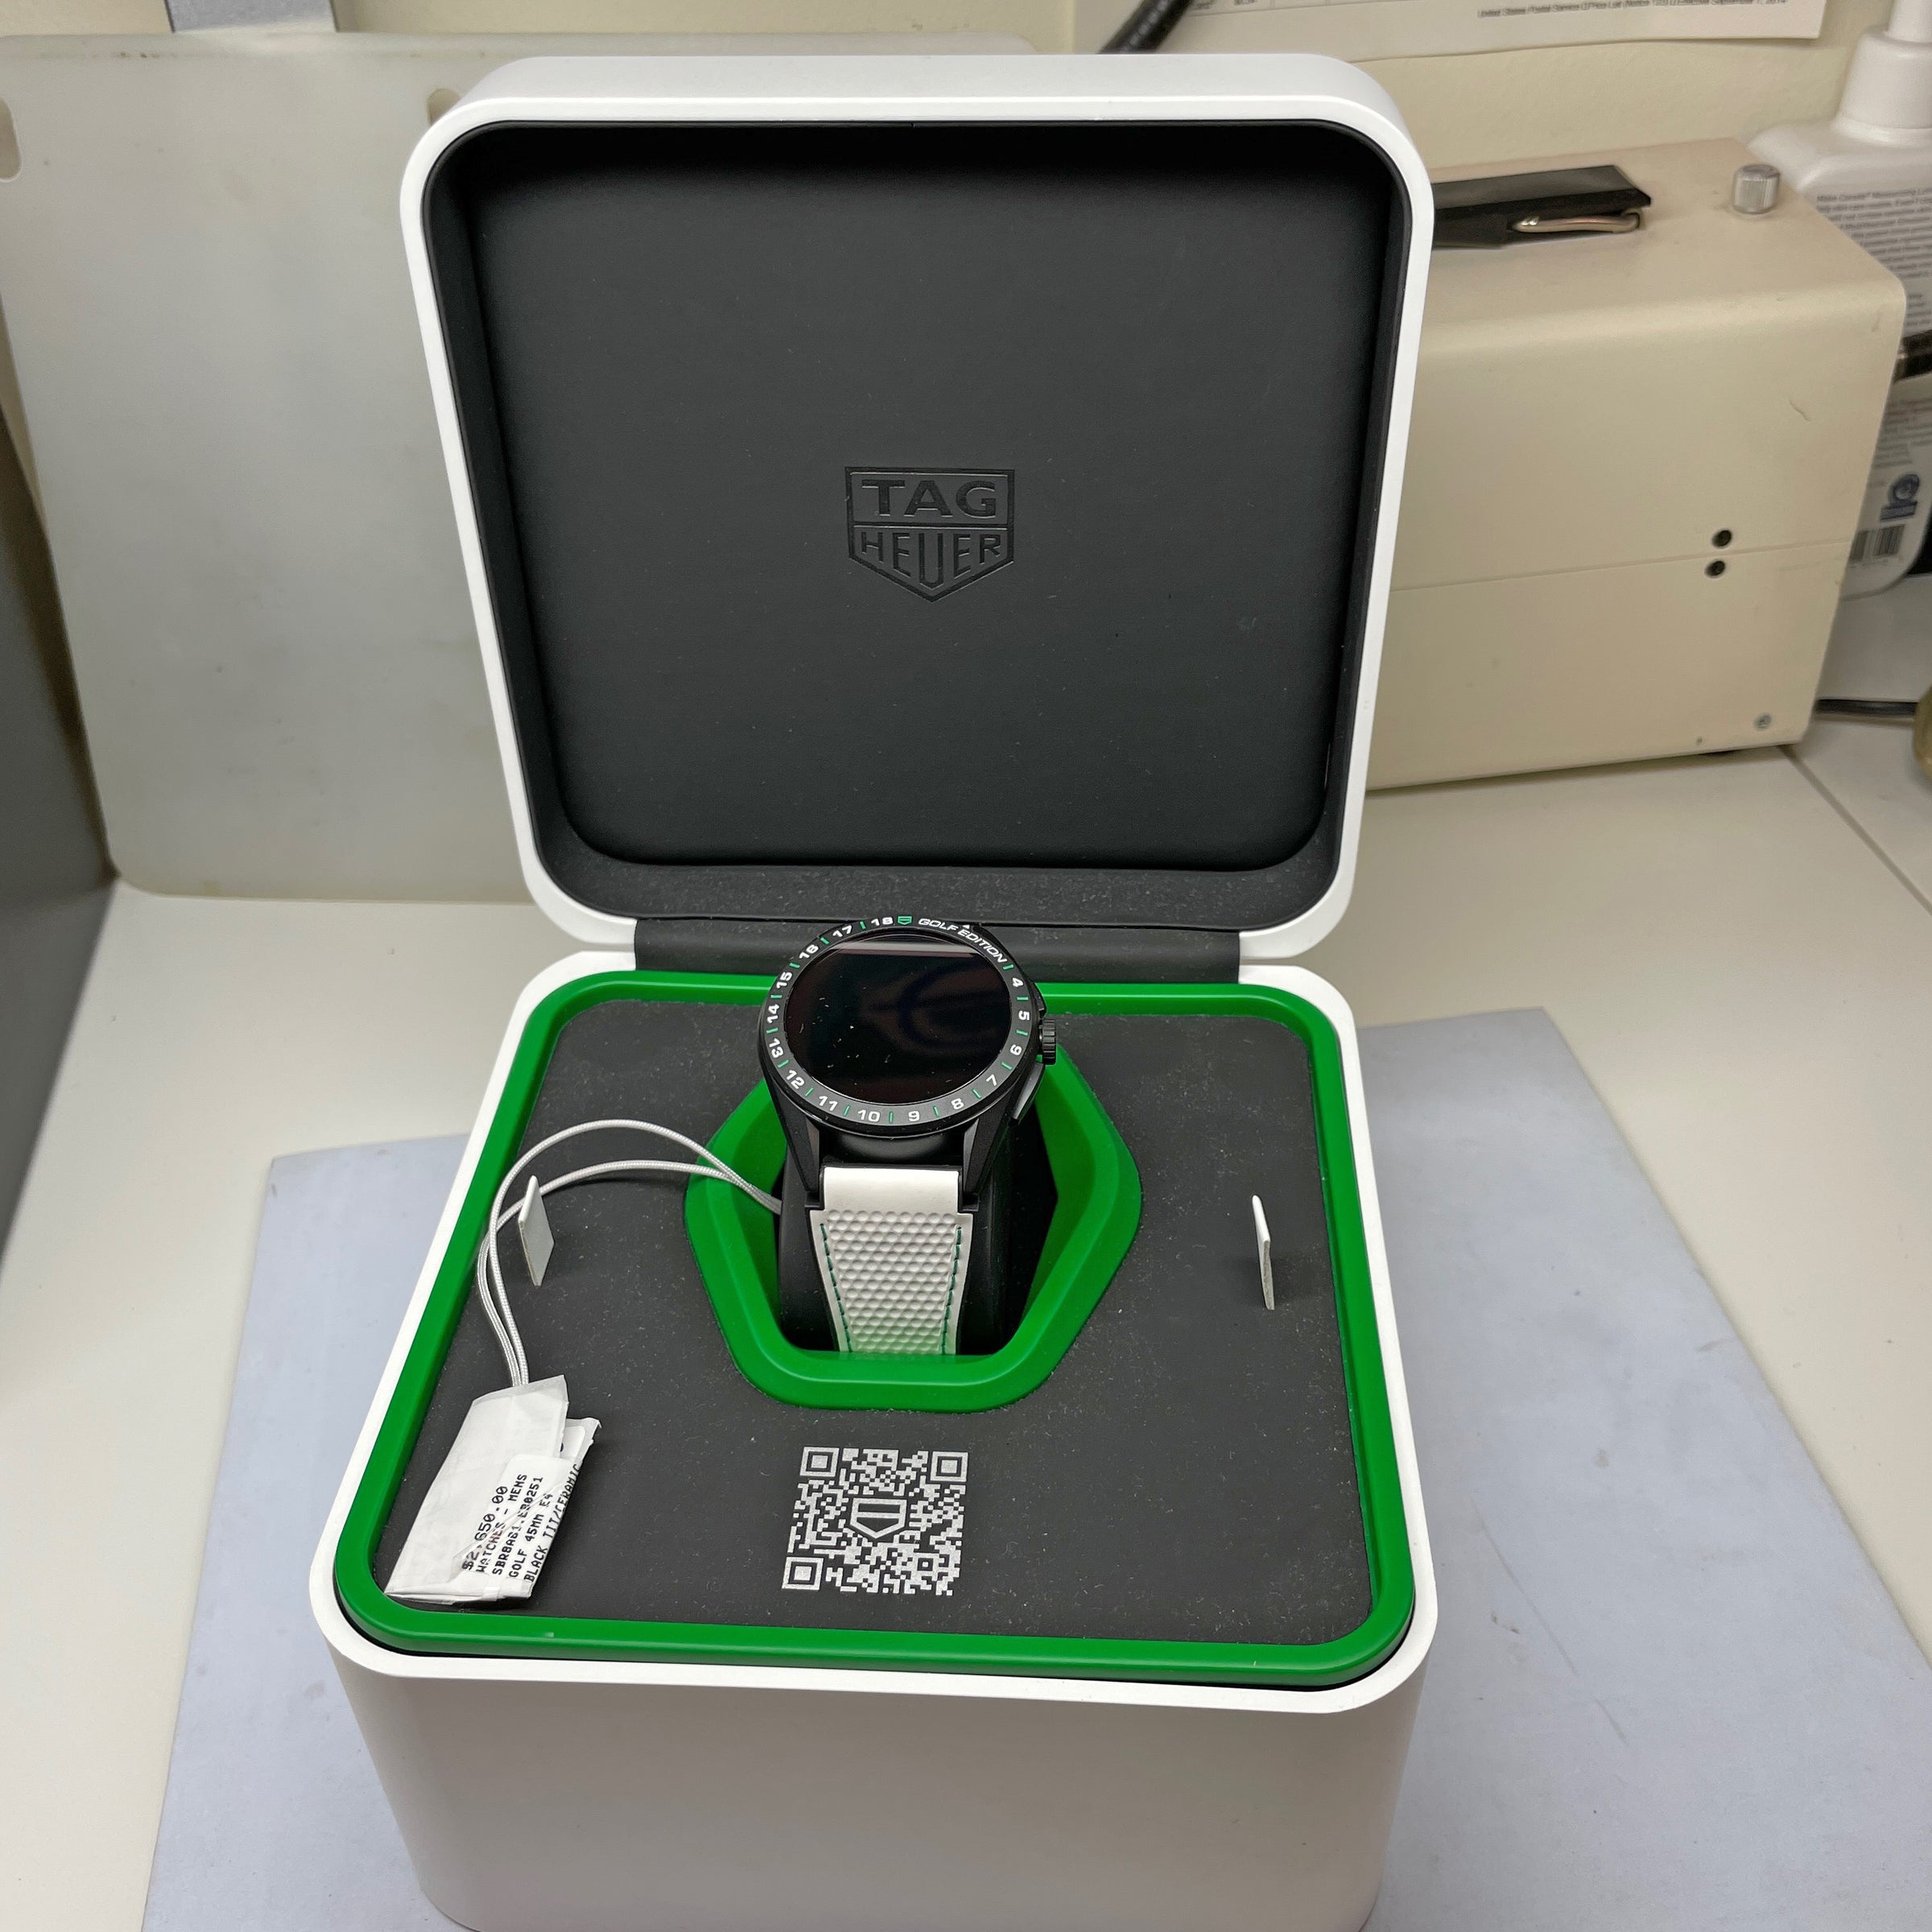 Tag Heuer Men's Connected Golf Smartwatch